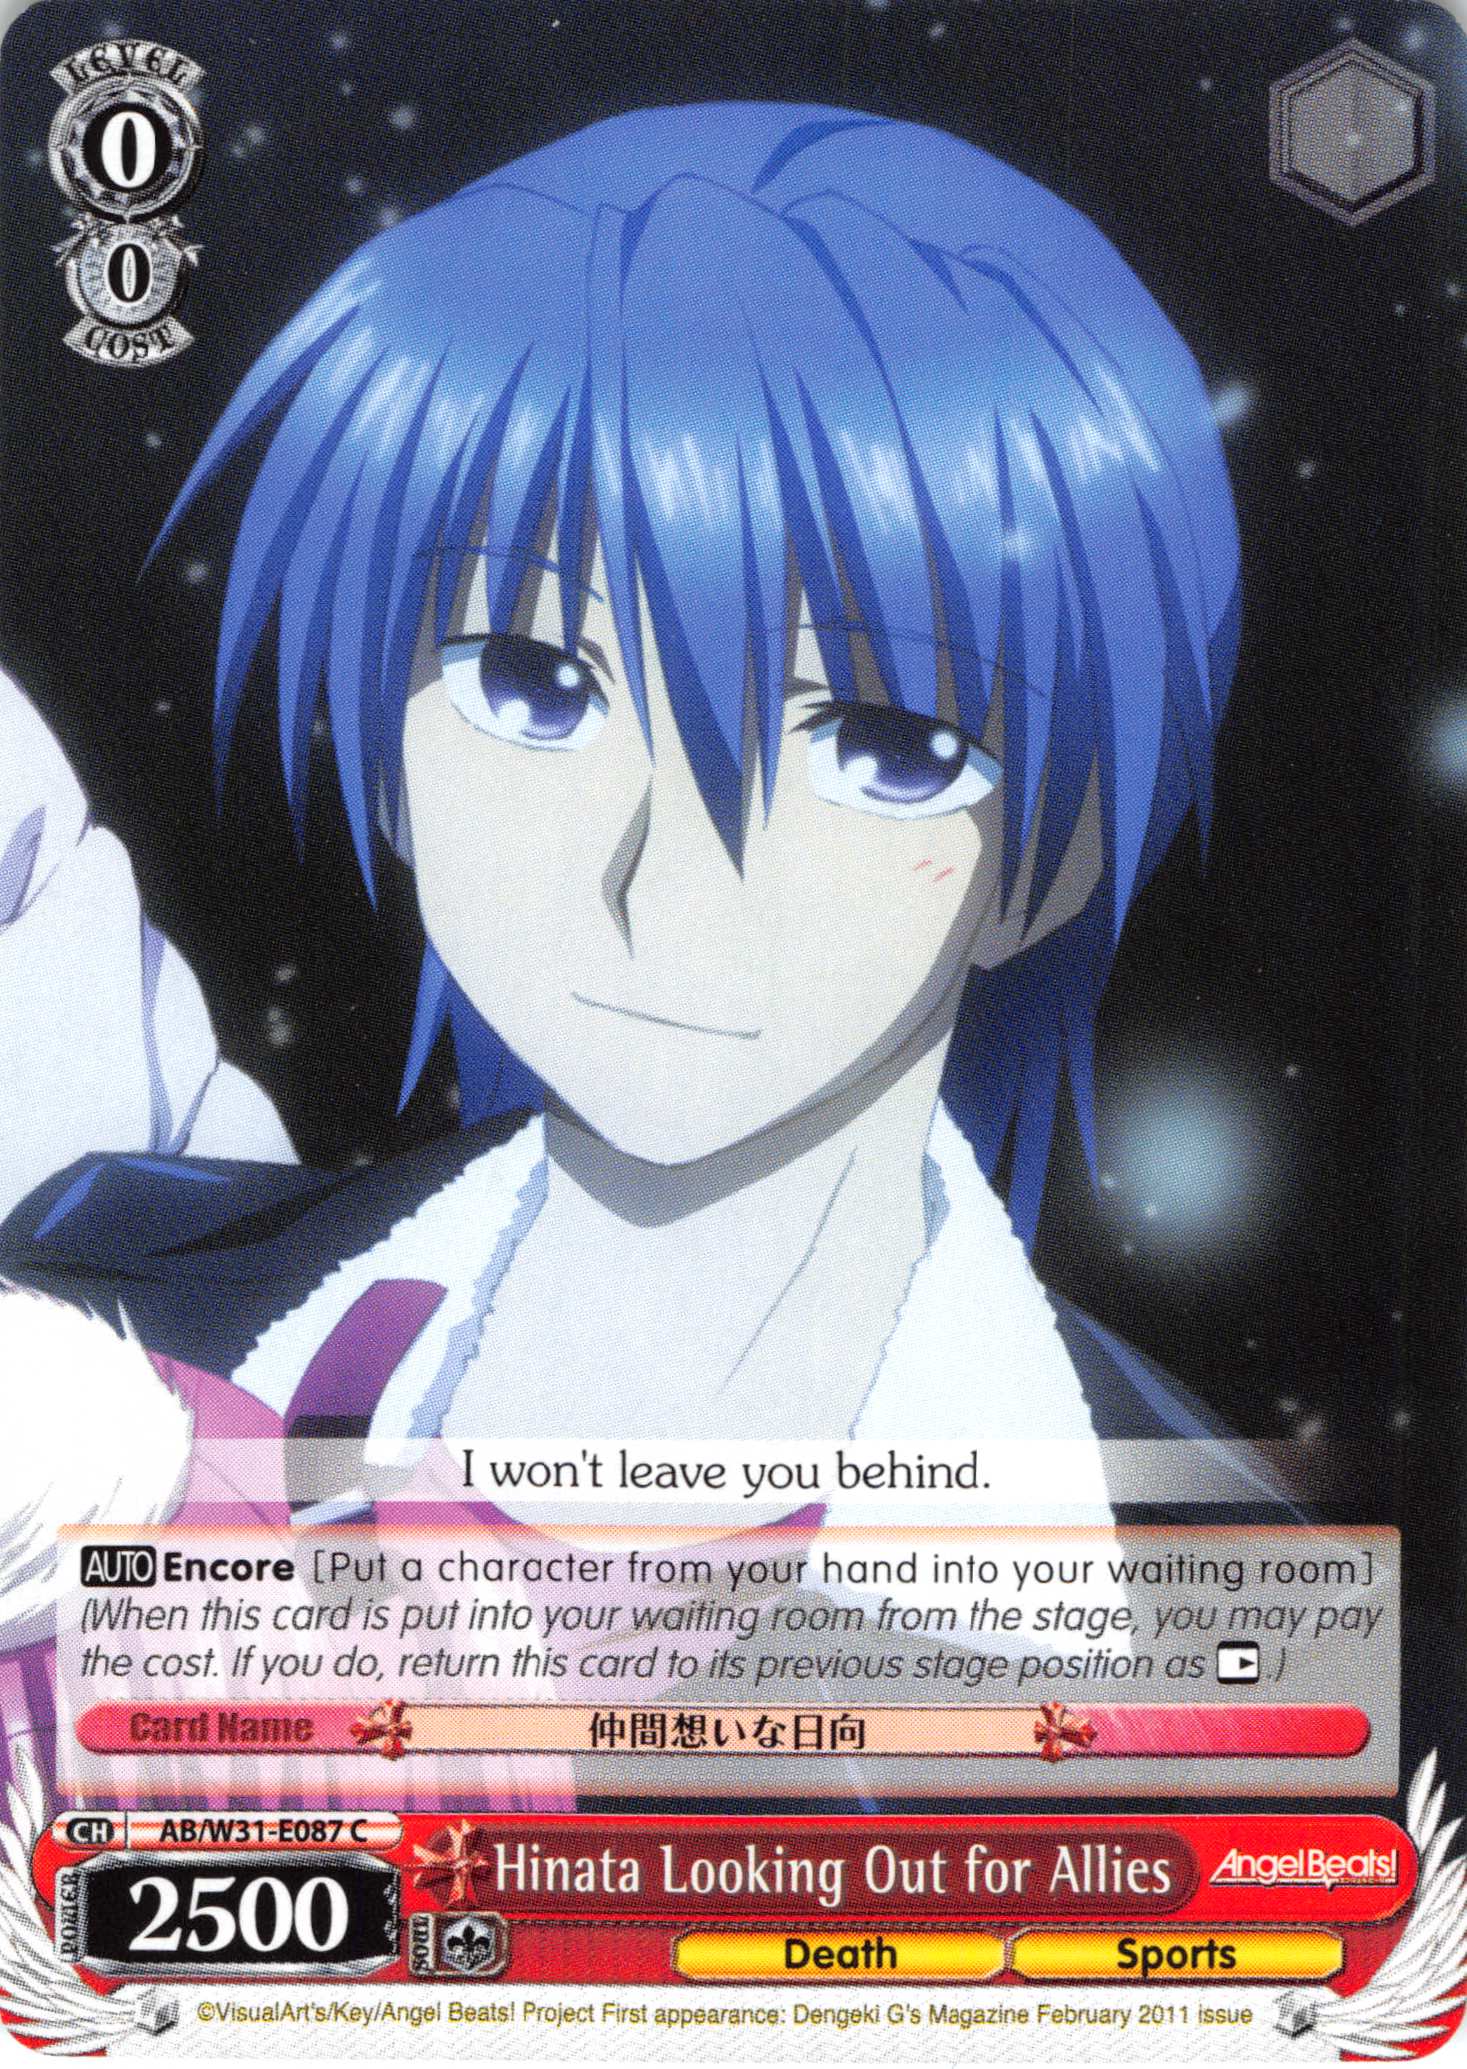 Hinata Looking Out for Allies (AB/W31-E087 C) [Angel Beats! Re:Edit]